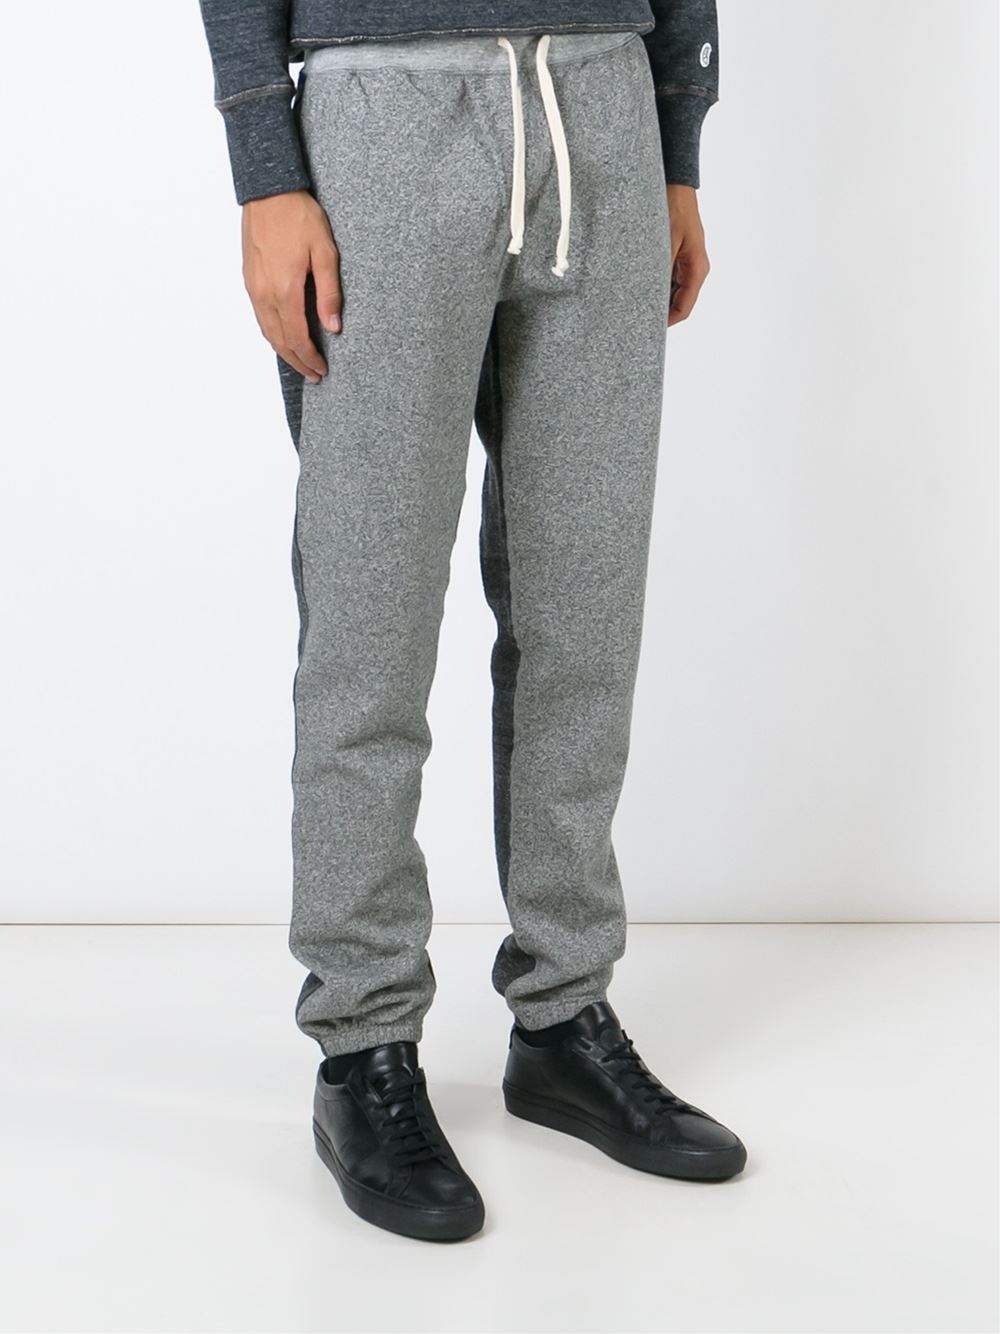 Lyst - Champion Two-tone Track Pants in Gray for Men